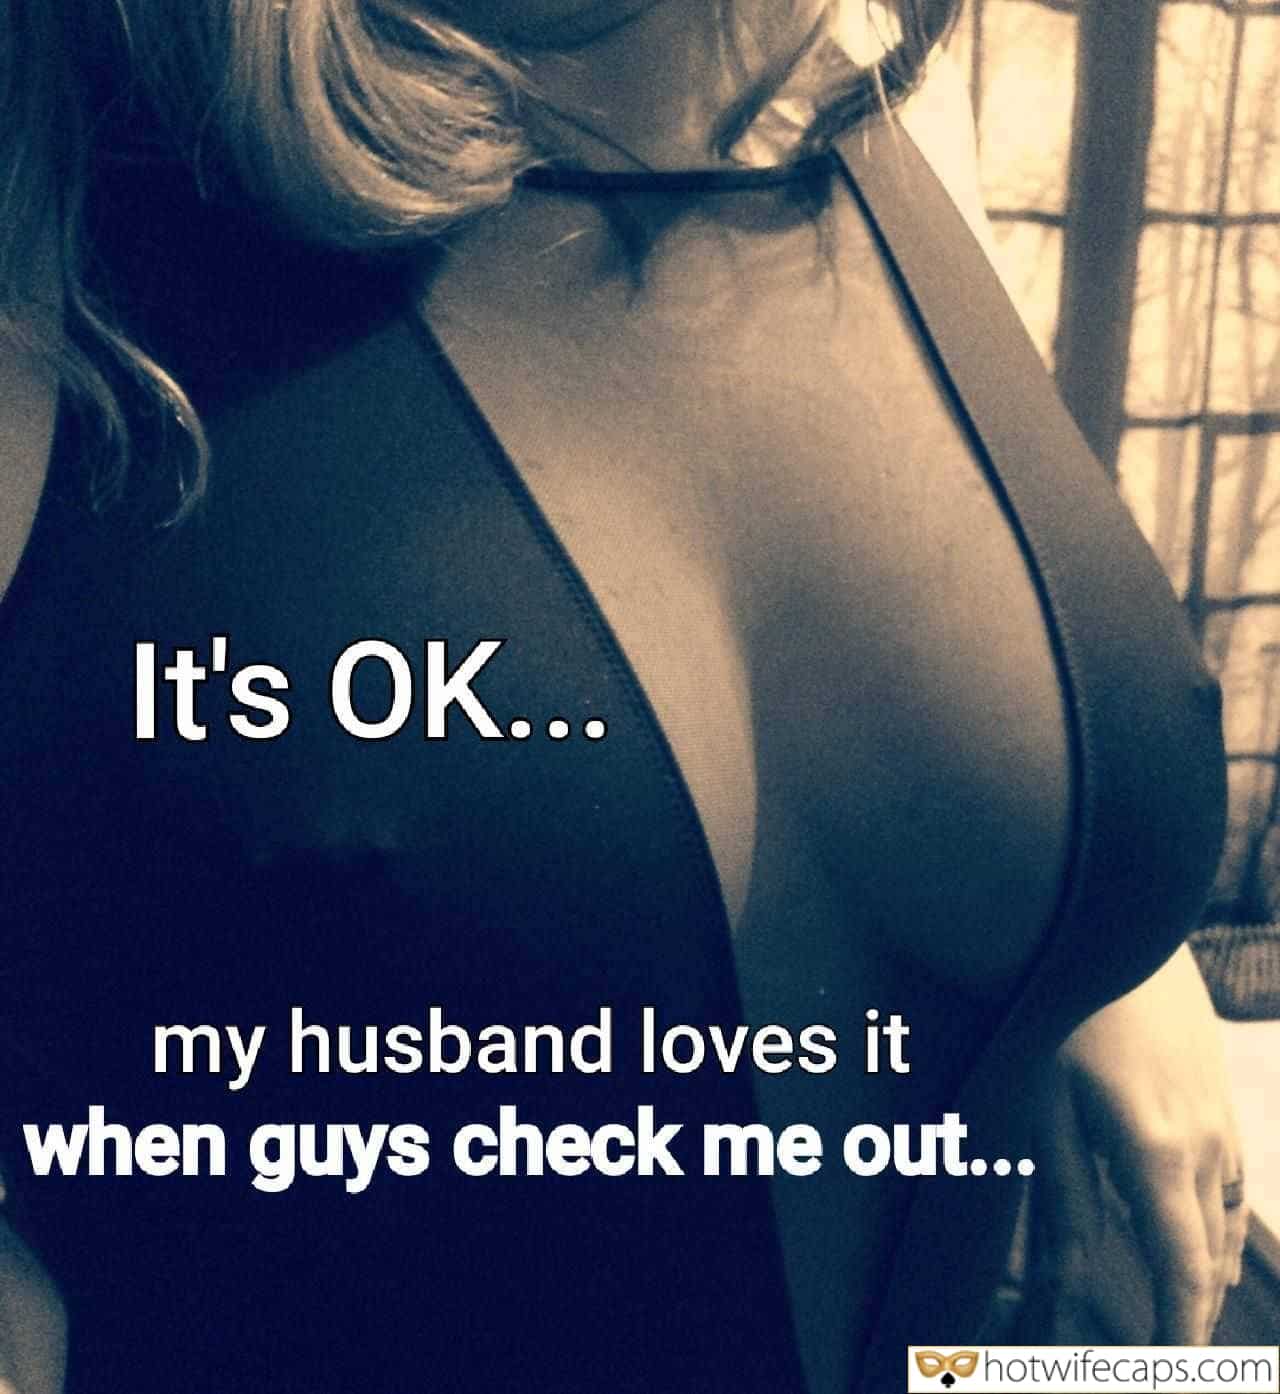 Sexy Memes Flashing Cuckold Cleanup Cheating hotwife caption: It’s OK… my husband loves it when guys check me out… Beautiful Breasts Without a Bra